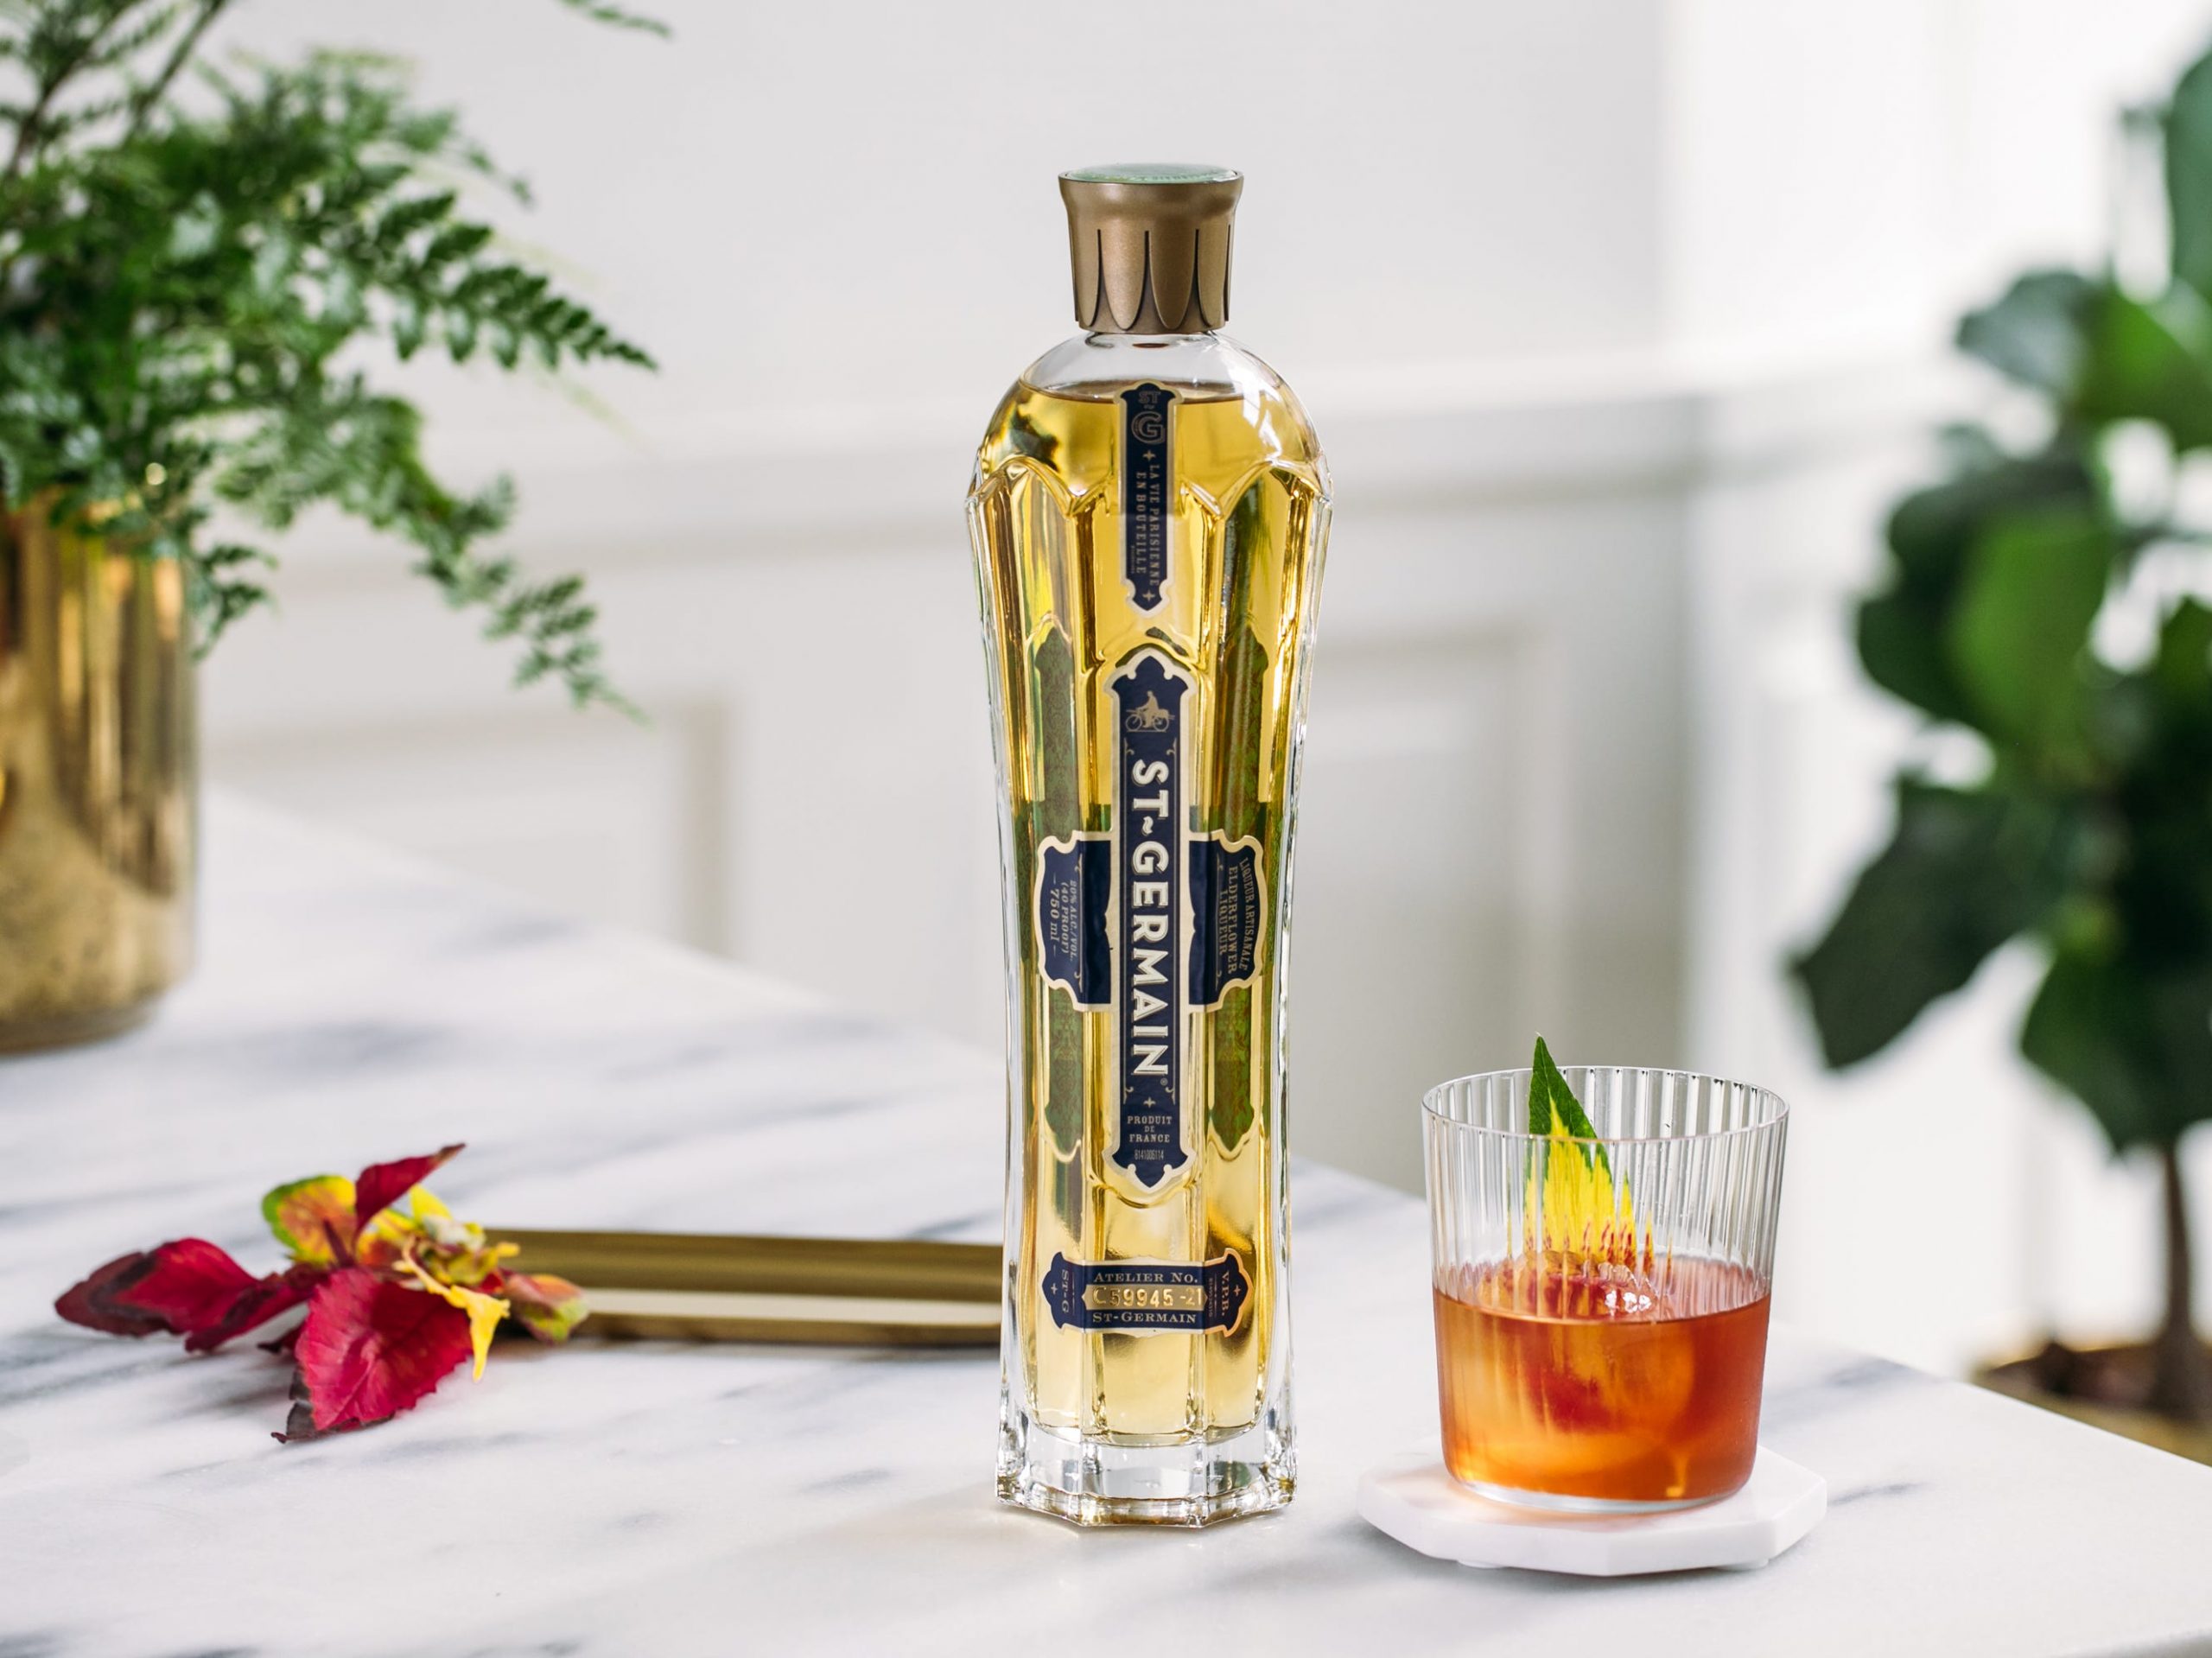 St. Germain bottle with an elder fashioned cocktail next to it